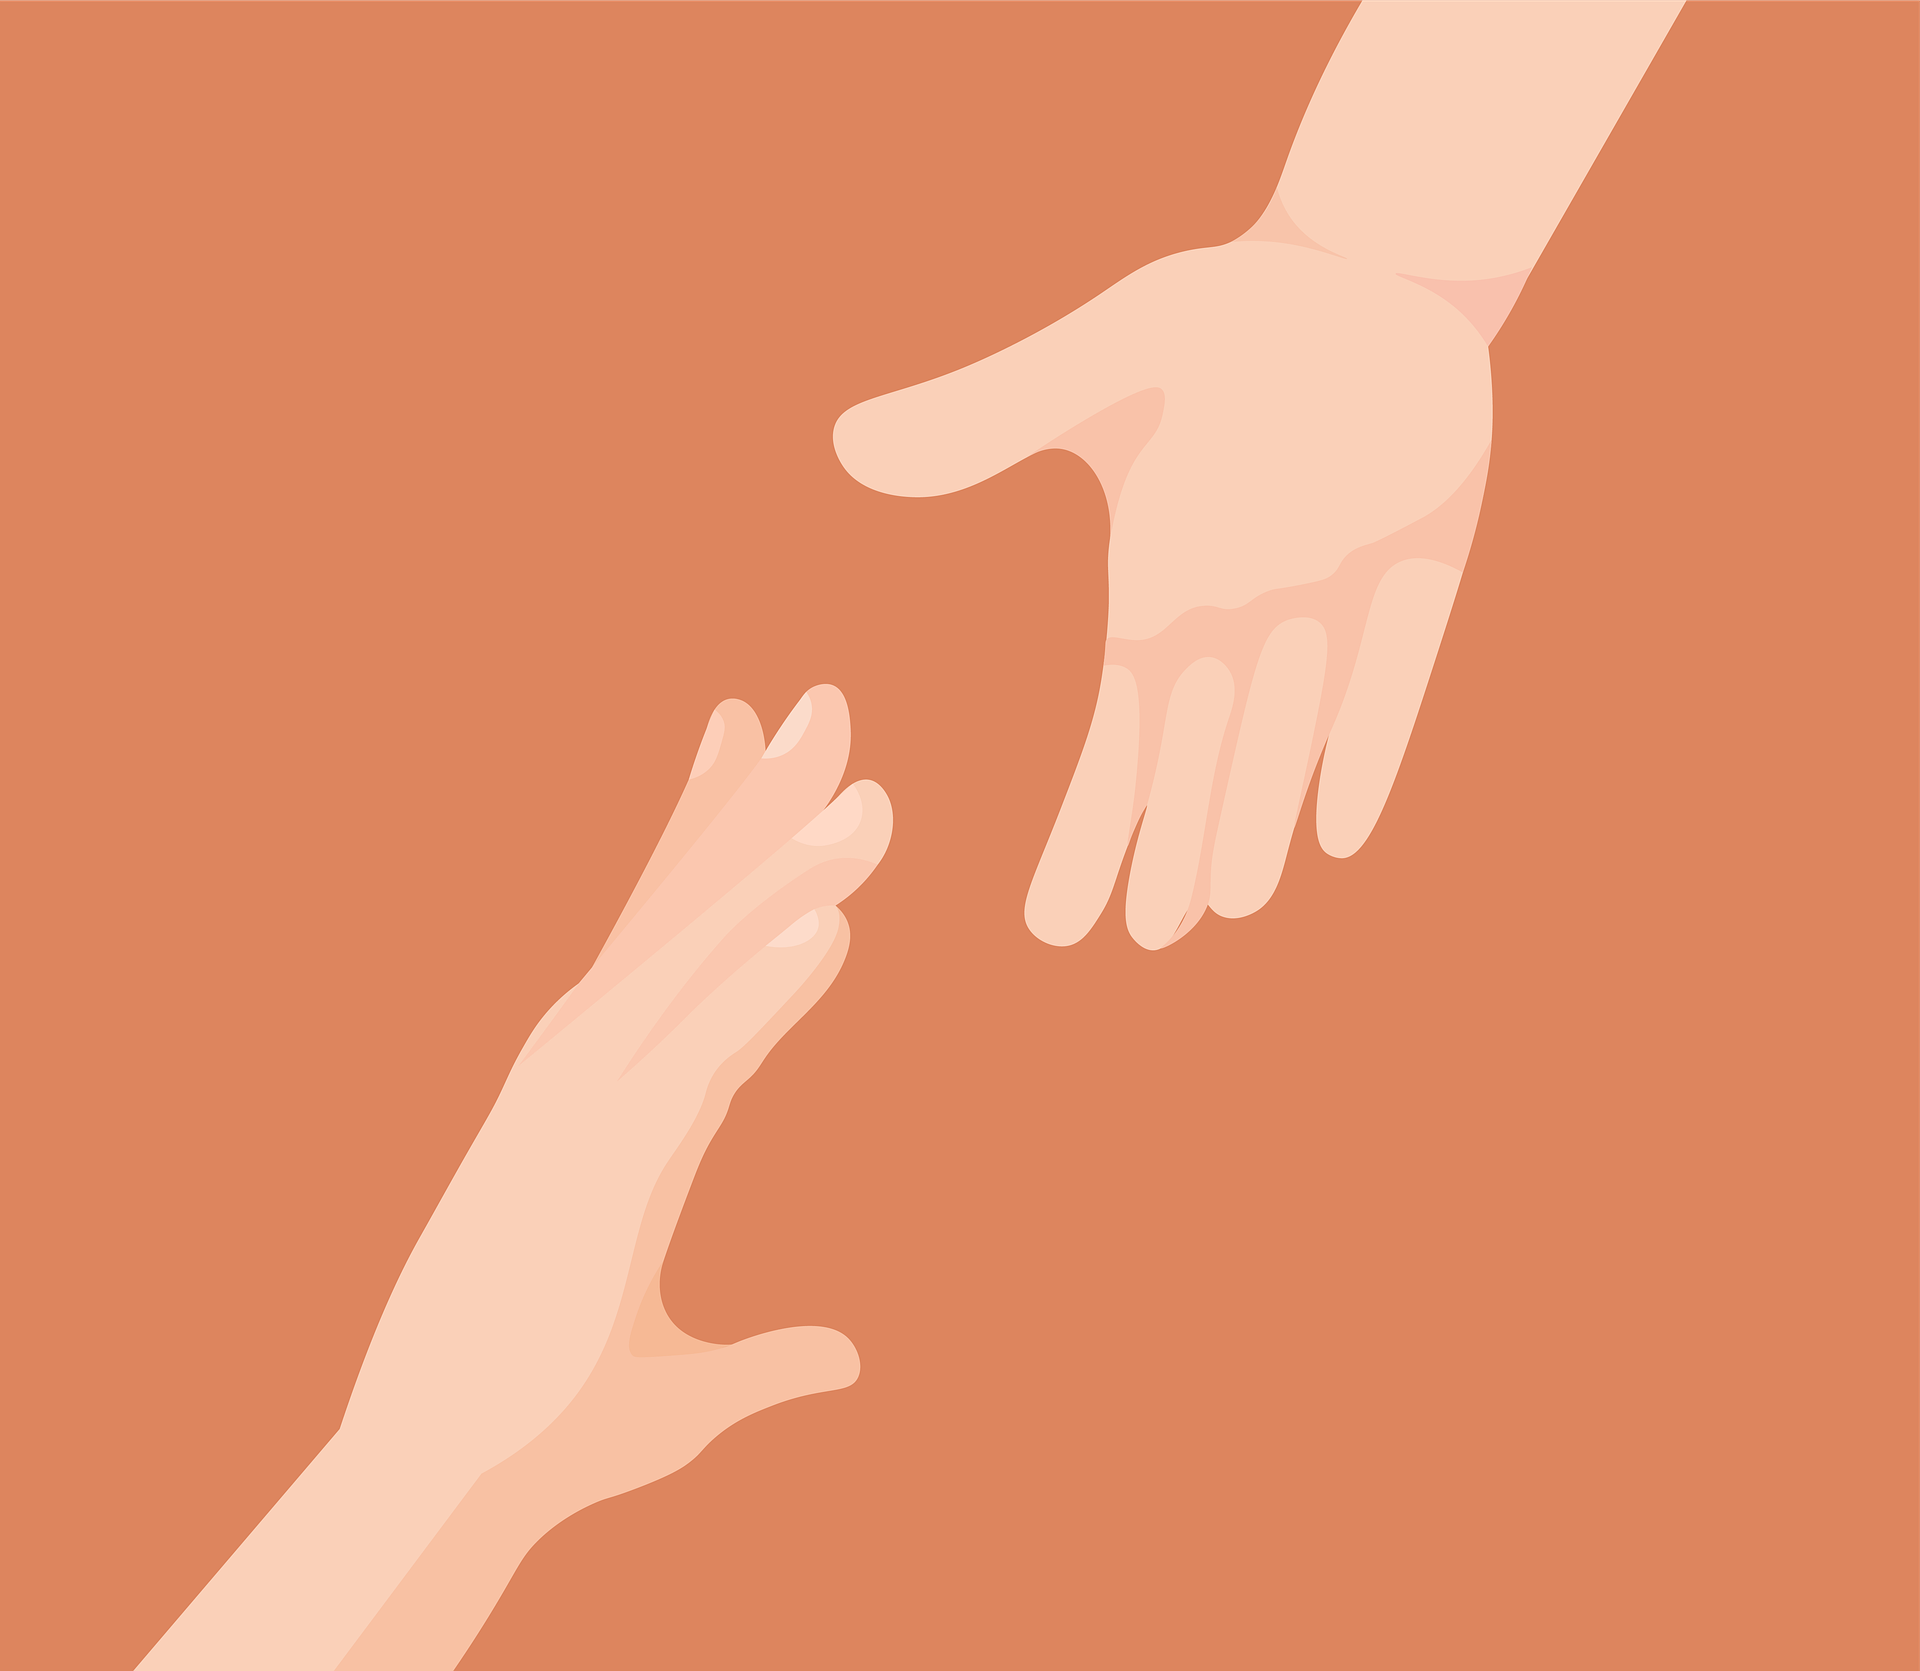 One hand reaching up to another which is reaching down to help. Cartoon drawing on a light terracotta coloured background